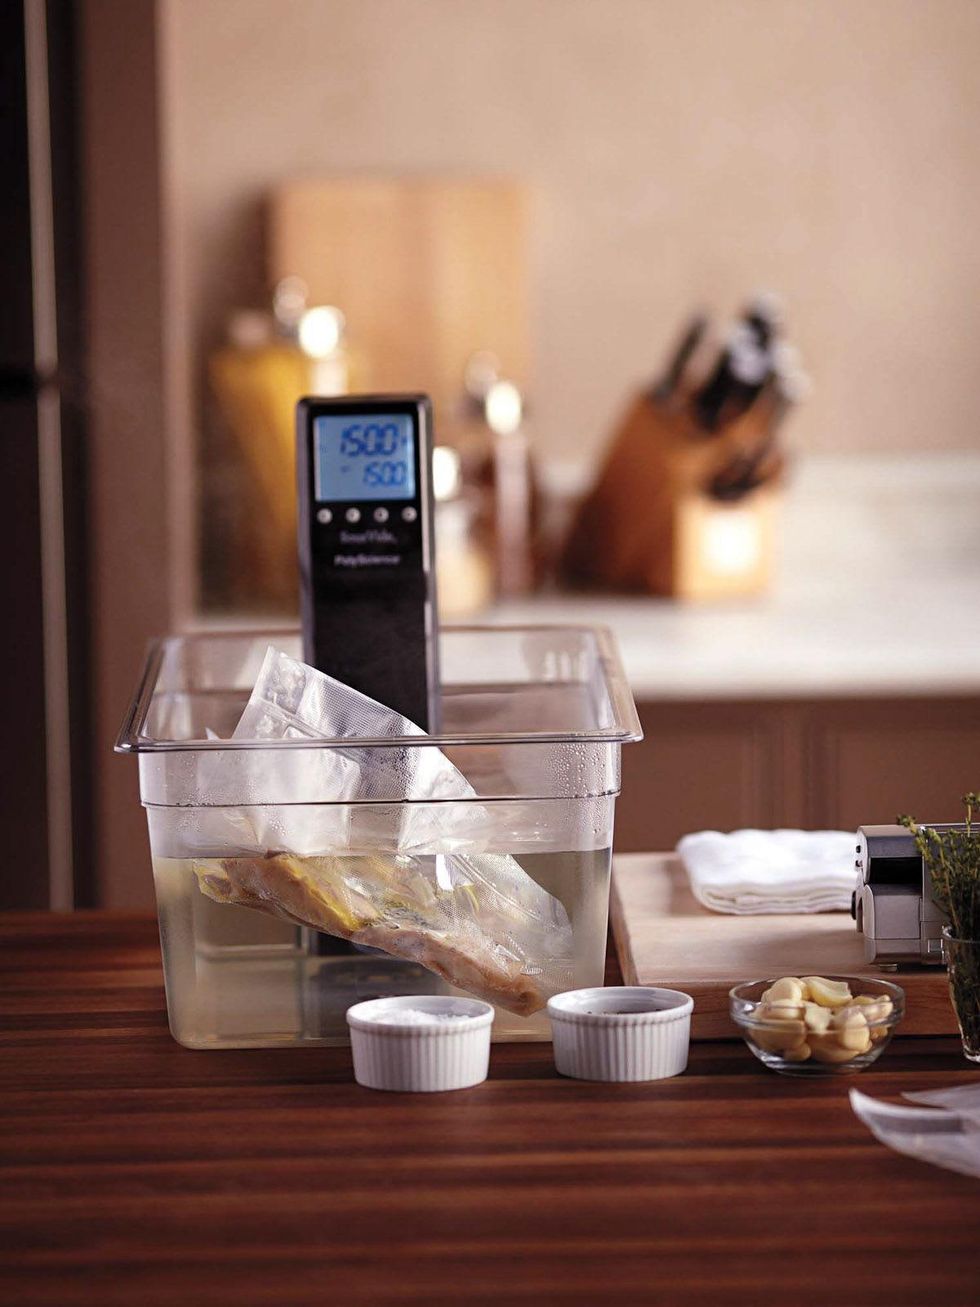 News_Gift Guide 2010_foodie_Williams-Sonoma_Polyscience Sous Vide